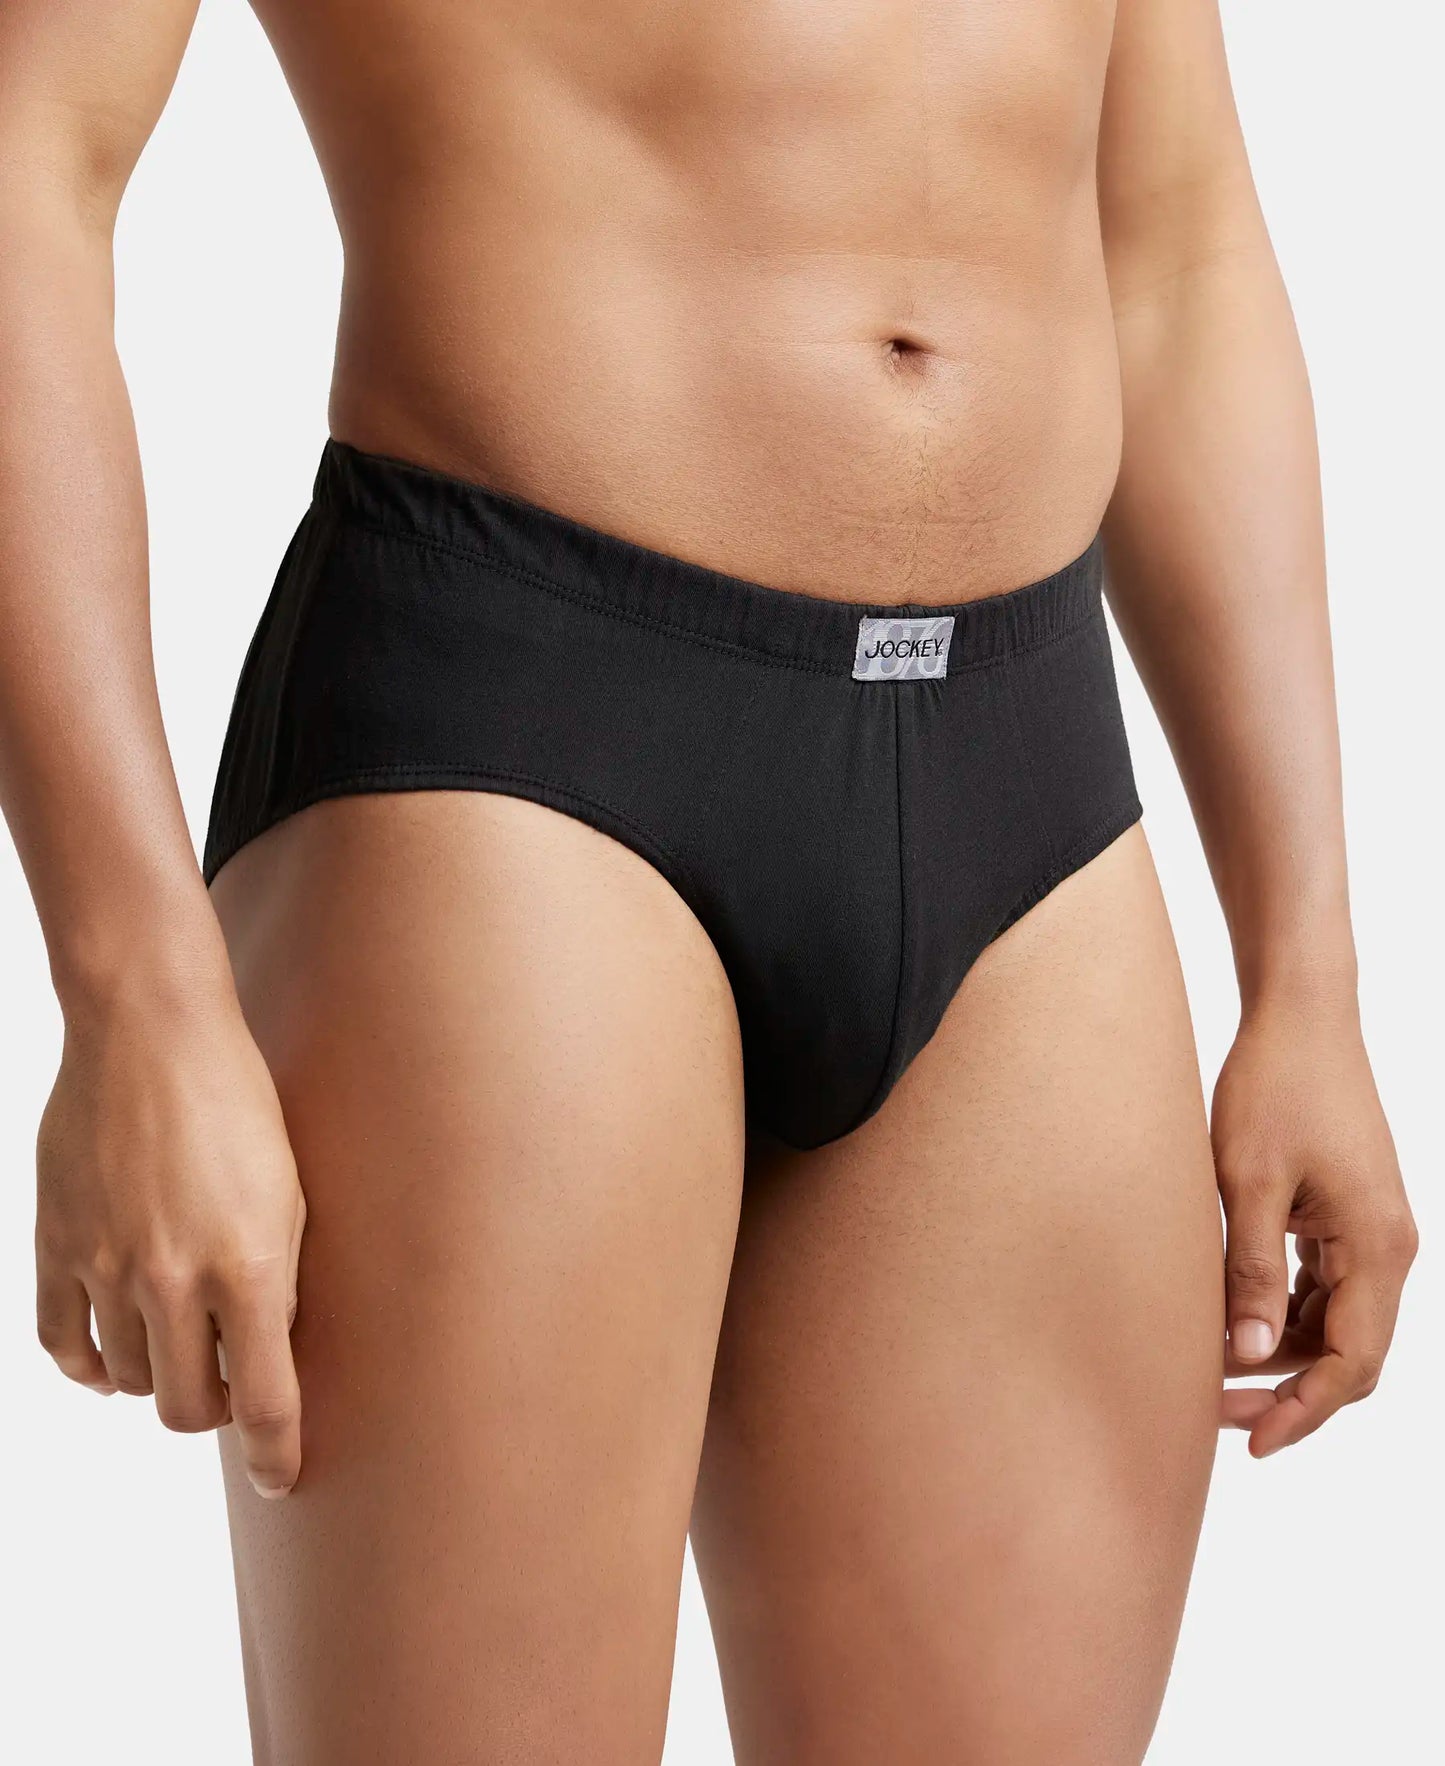 Super Combed Cotton Solid Brief with Ultrasoft Concealed Waistband - Black-2